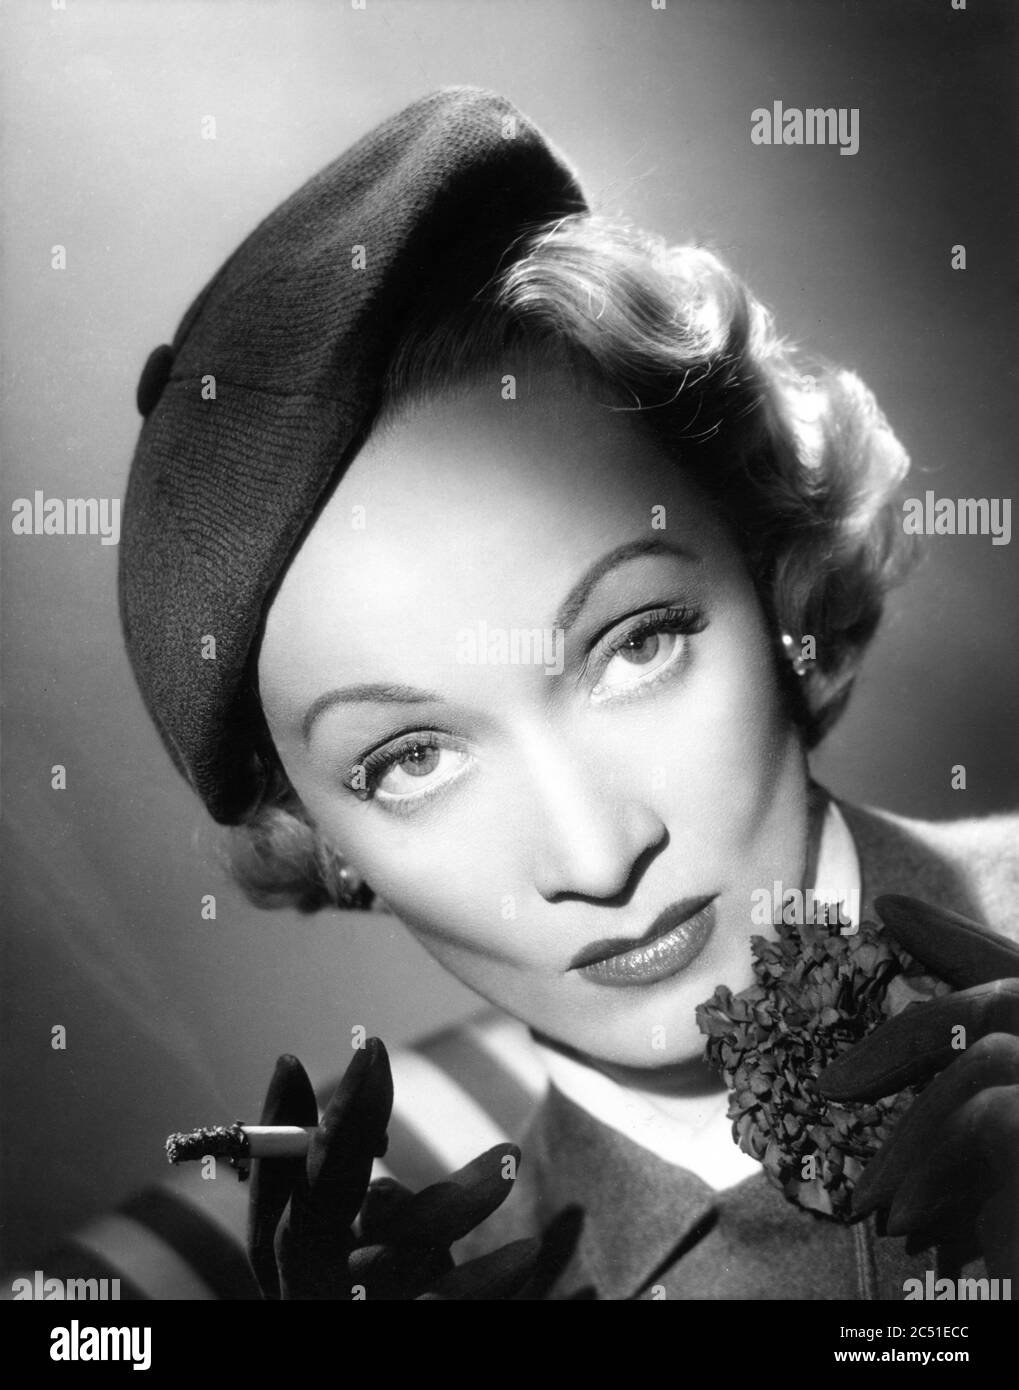 German Actress 1951 High Resolution Stock Photography and Images - Alamy